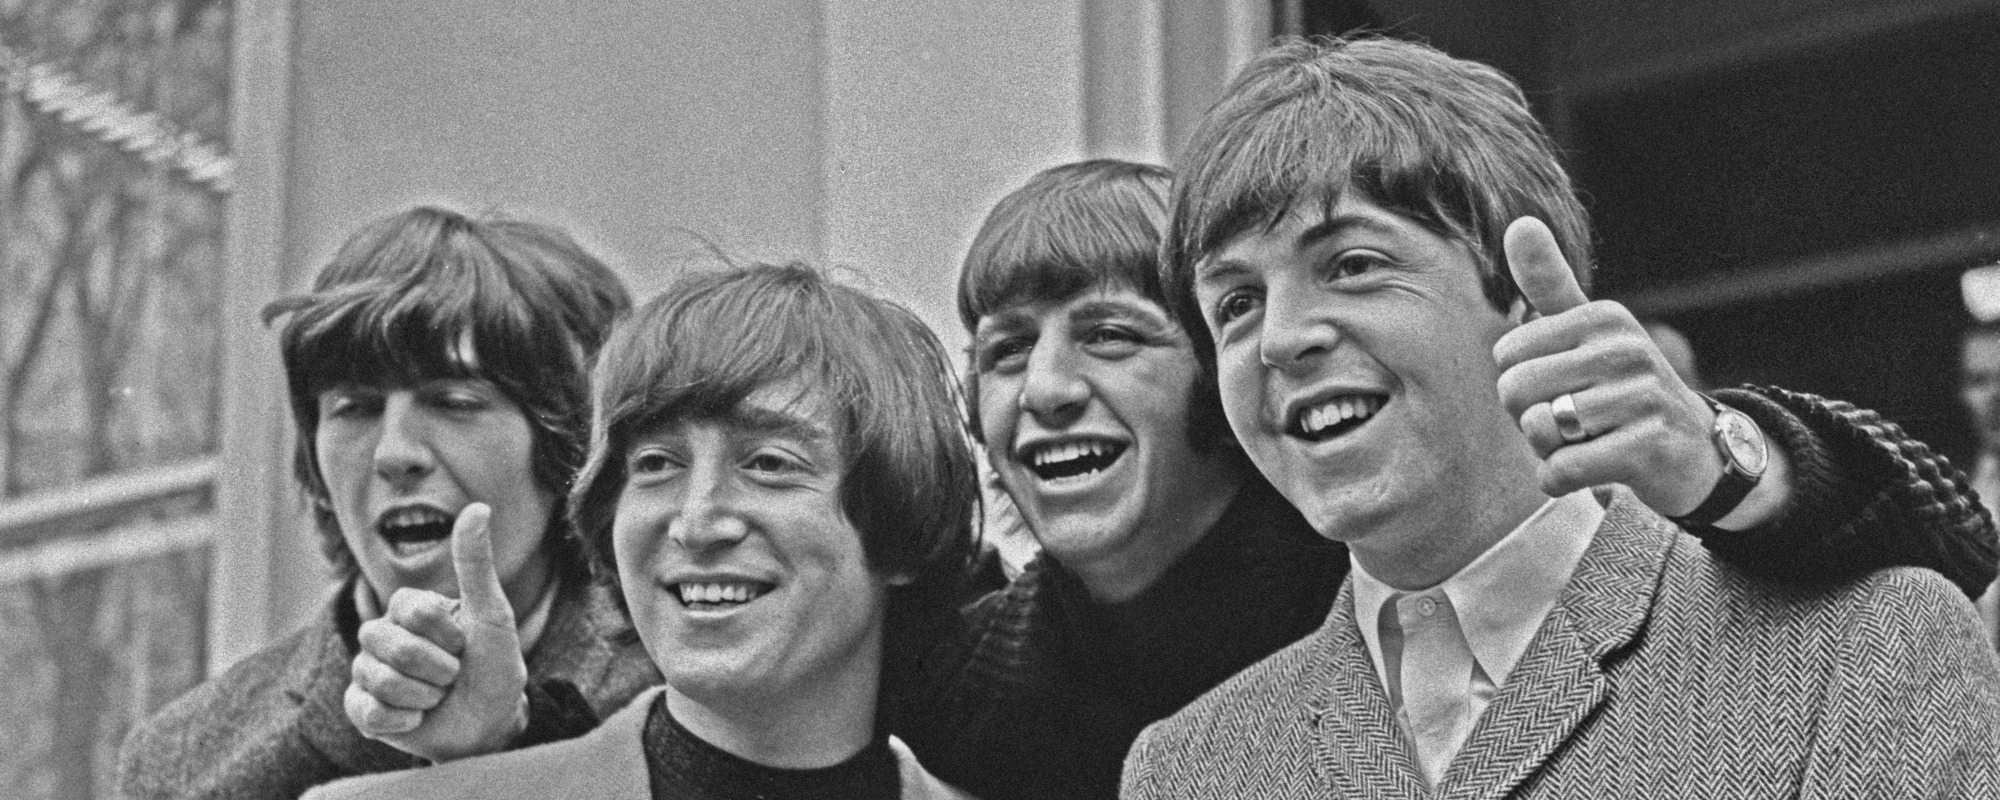 The Song That John Lennon Used to Bash Beatlemania